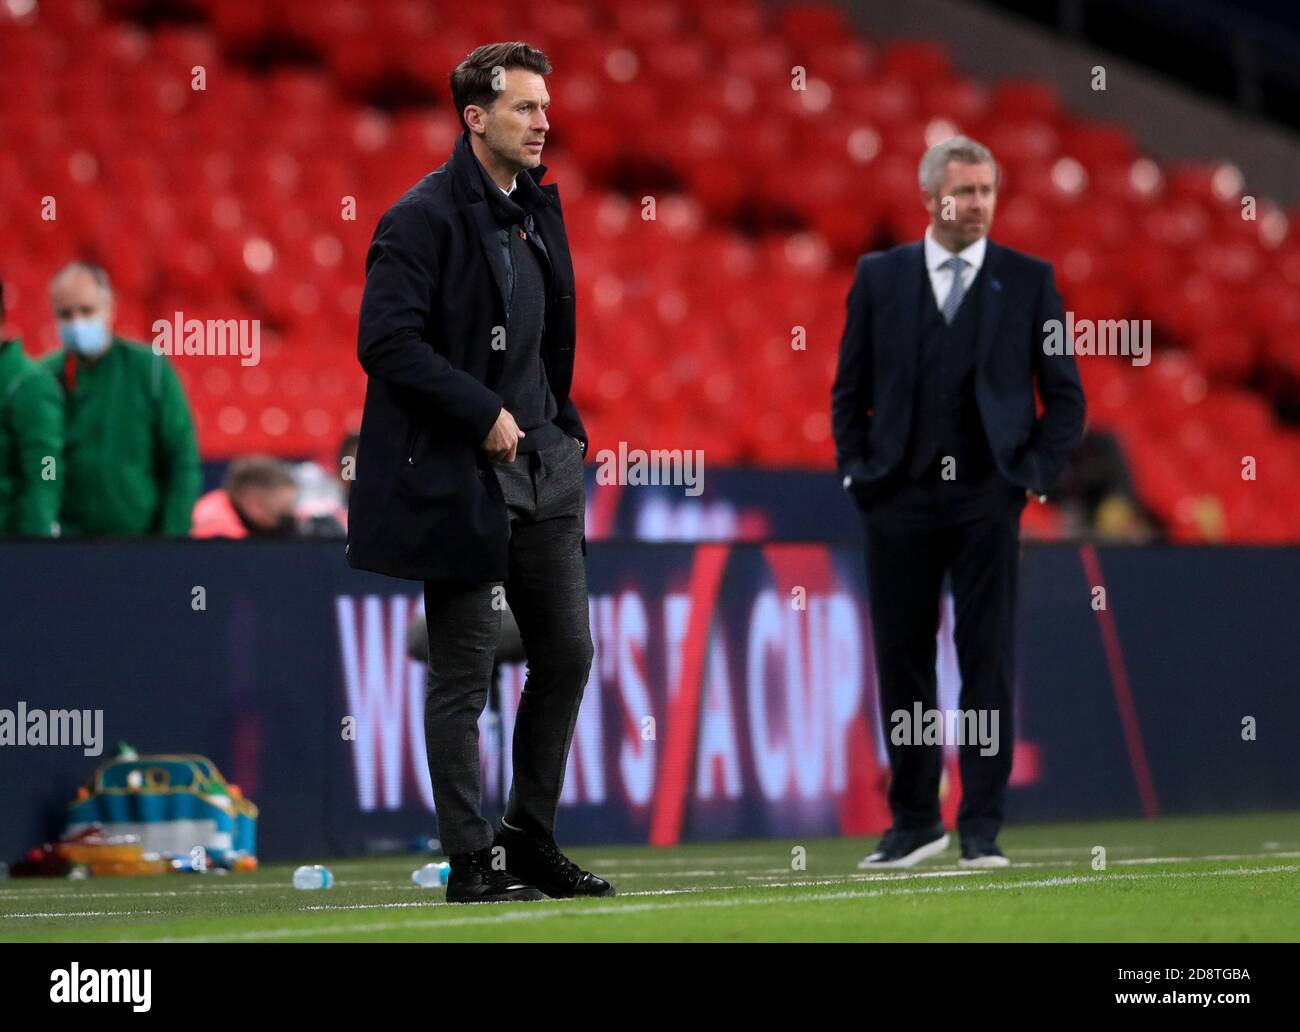 Manchester City manager Gareth Taylor (left) during the Women's FA Cup Final at Wembley Stadium, London. Stock Photo